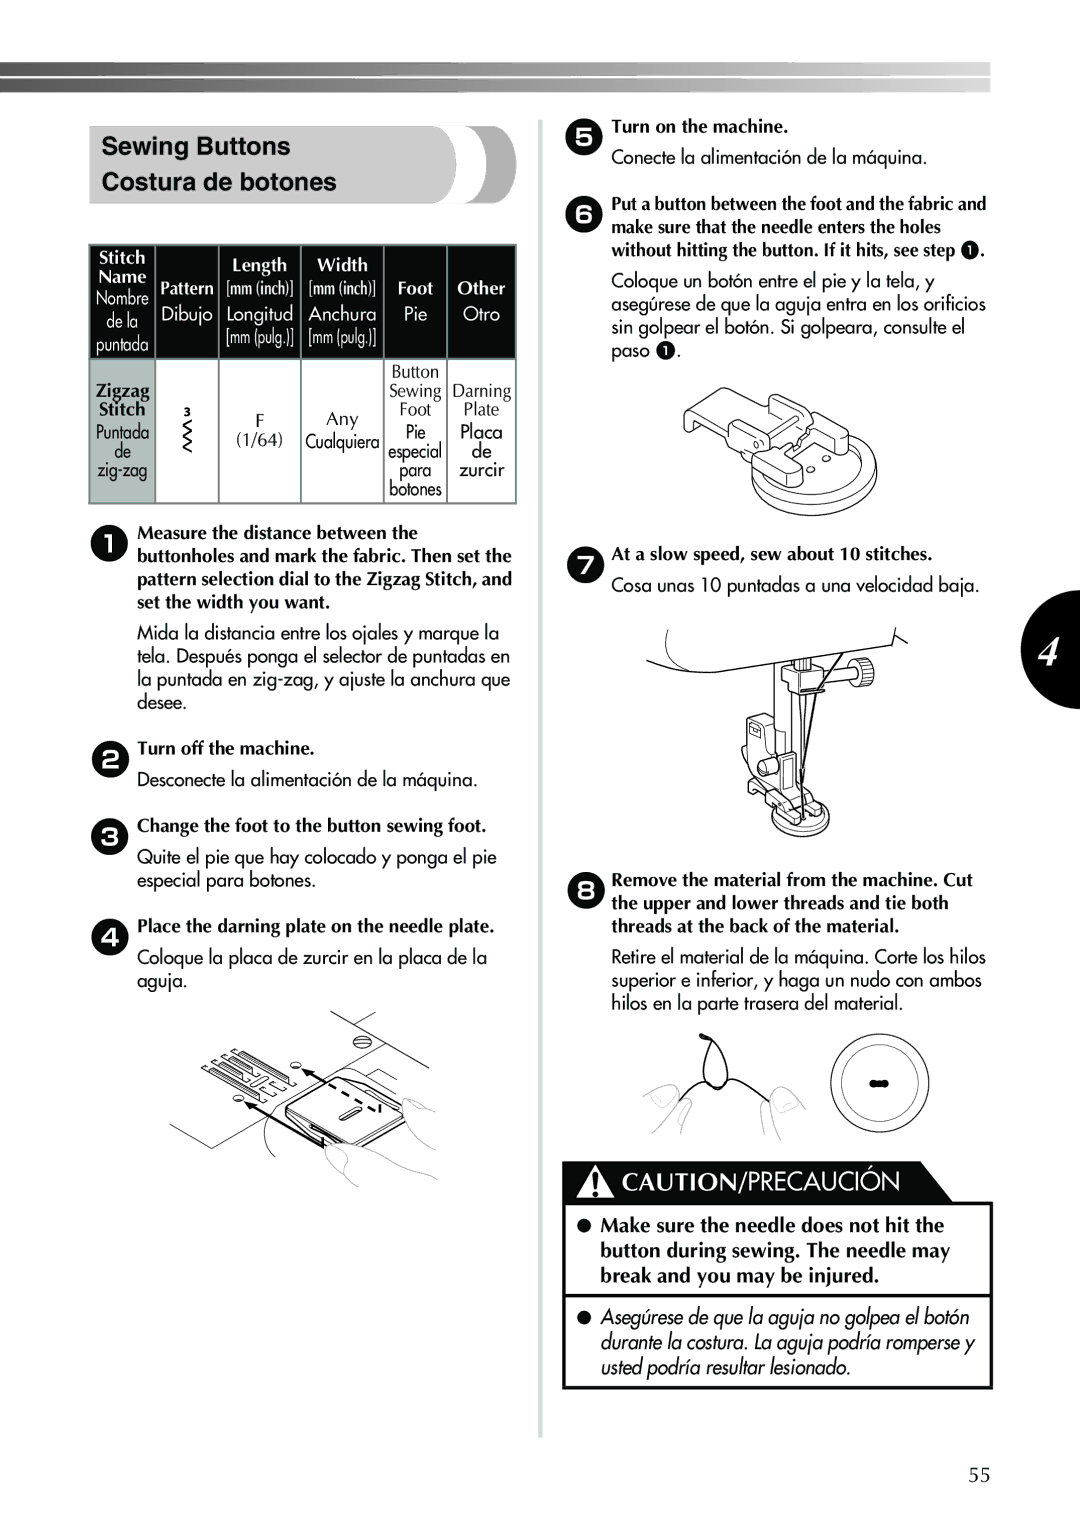 Brother XL-2600 operation manual Sewing Buttons Costura de botones, 2Turn off the machine 